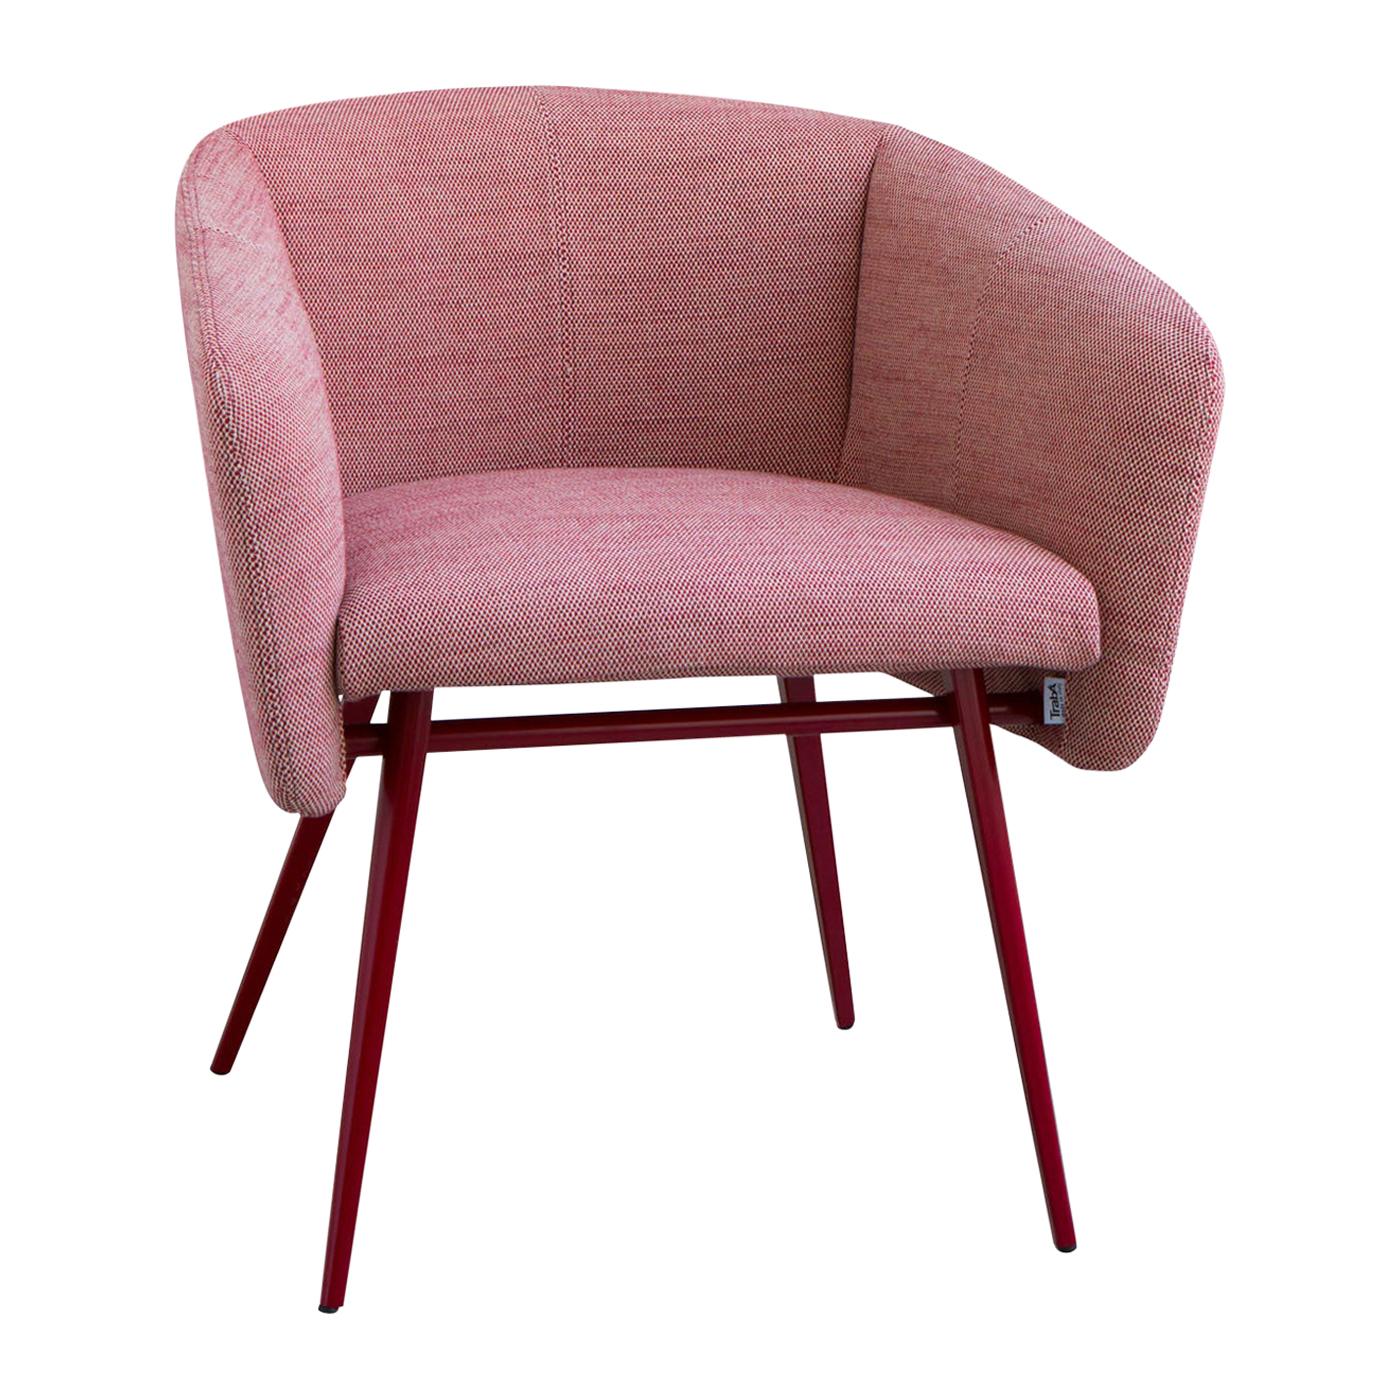 Balù Met Pink Chair by Emilio Nanni For Sale